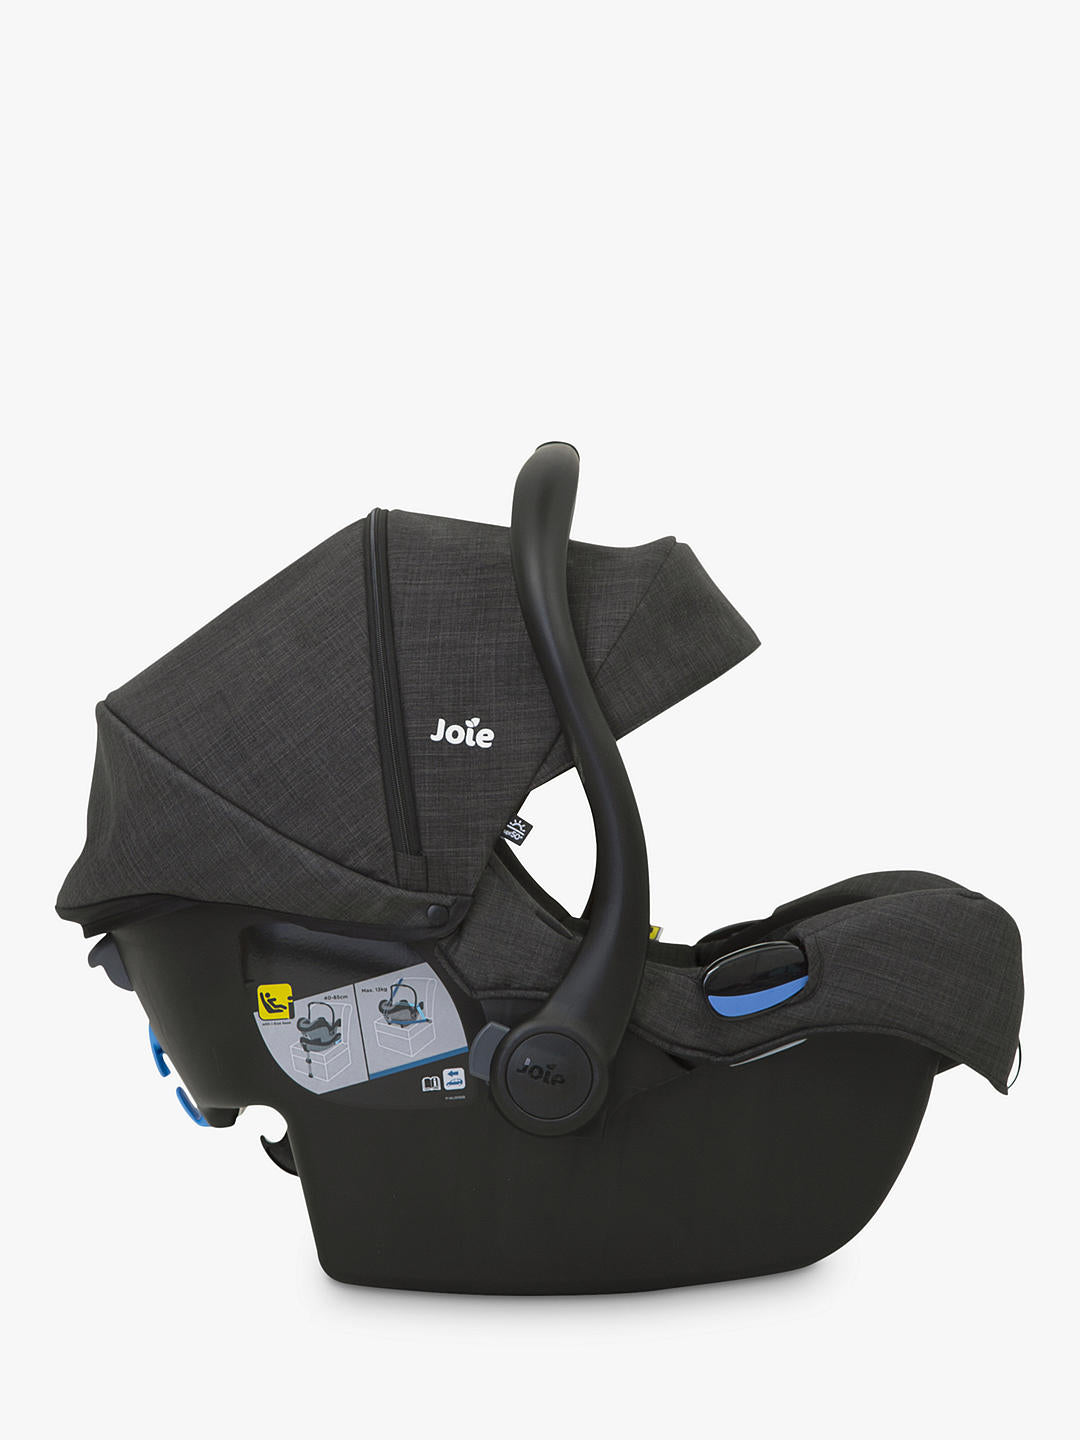 Joie Baby i-Gemm2 Group 0+ Baby Secure car seat 